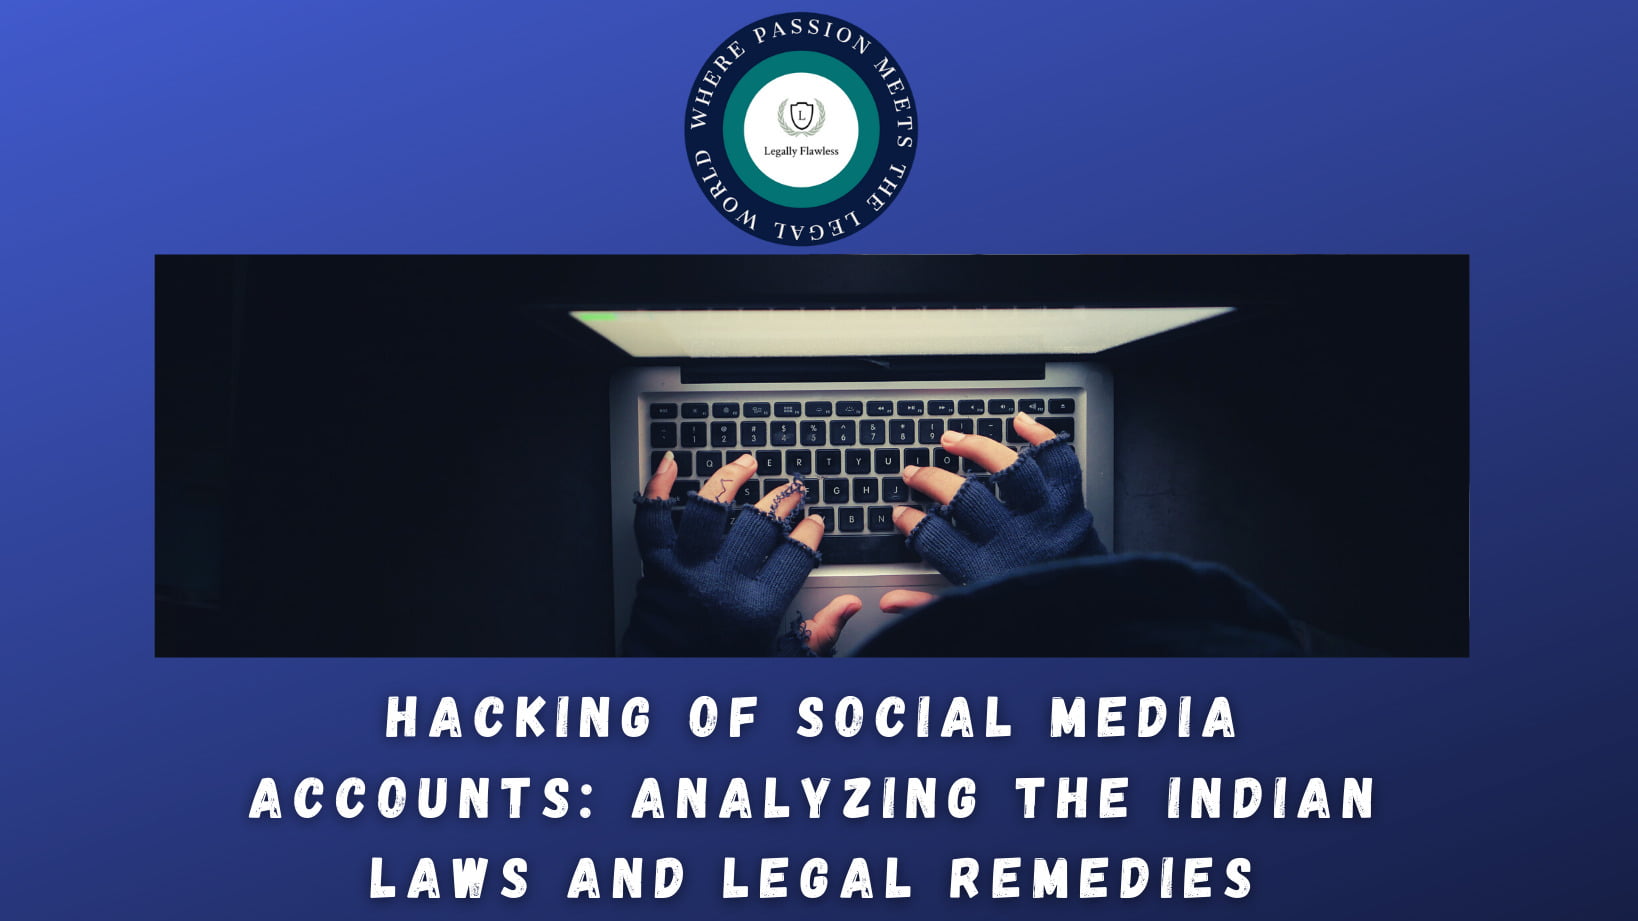 Hacking of Social Media Accounts: Analyzing the Indian Laws and Legal Remedies